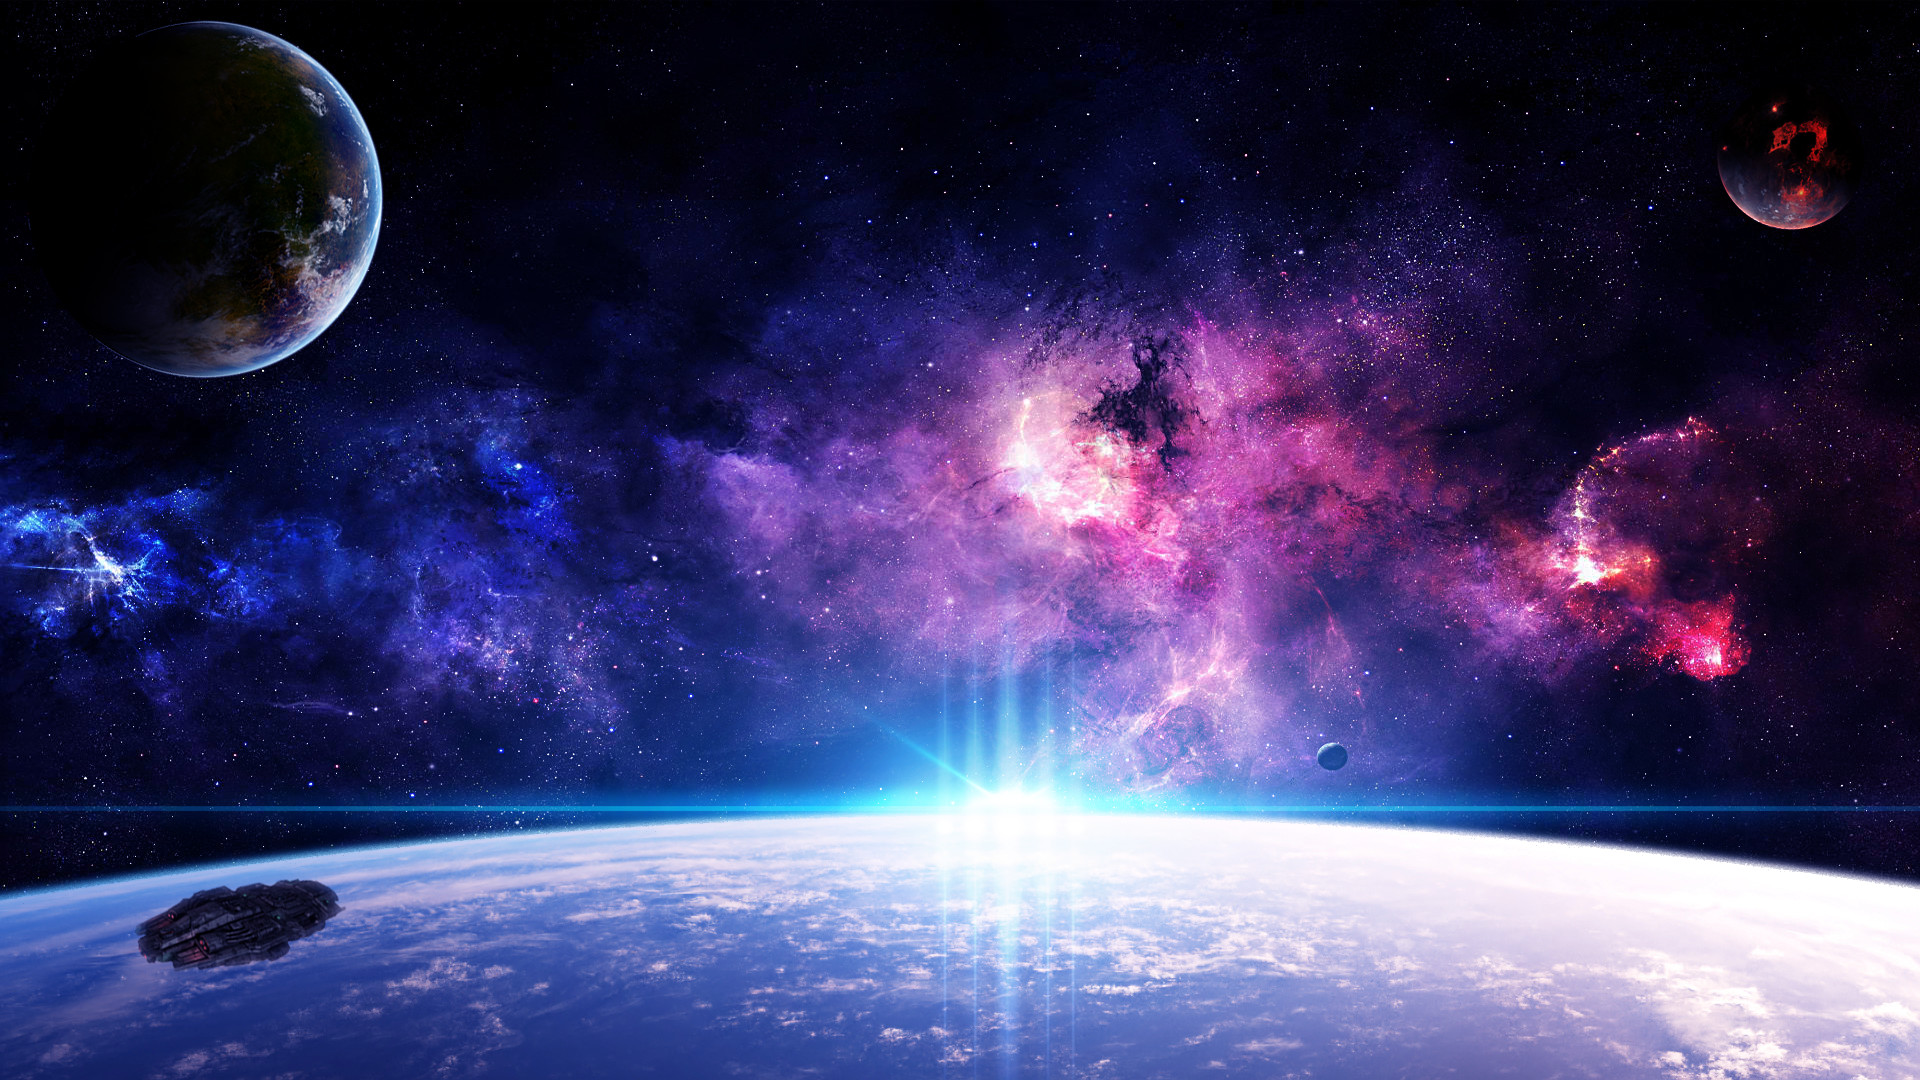 Space Fantasy Wallpapers Find best latest Space Fantasy Wallpapers in HD for your PC desktop background mobile phones